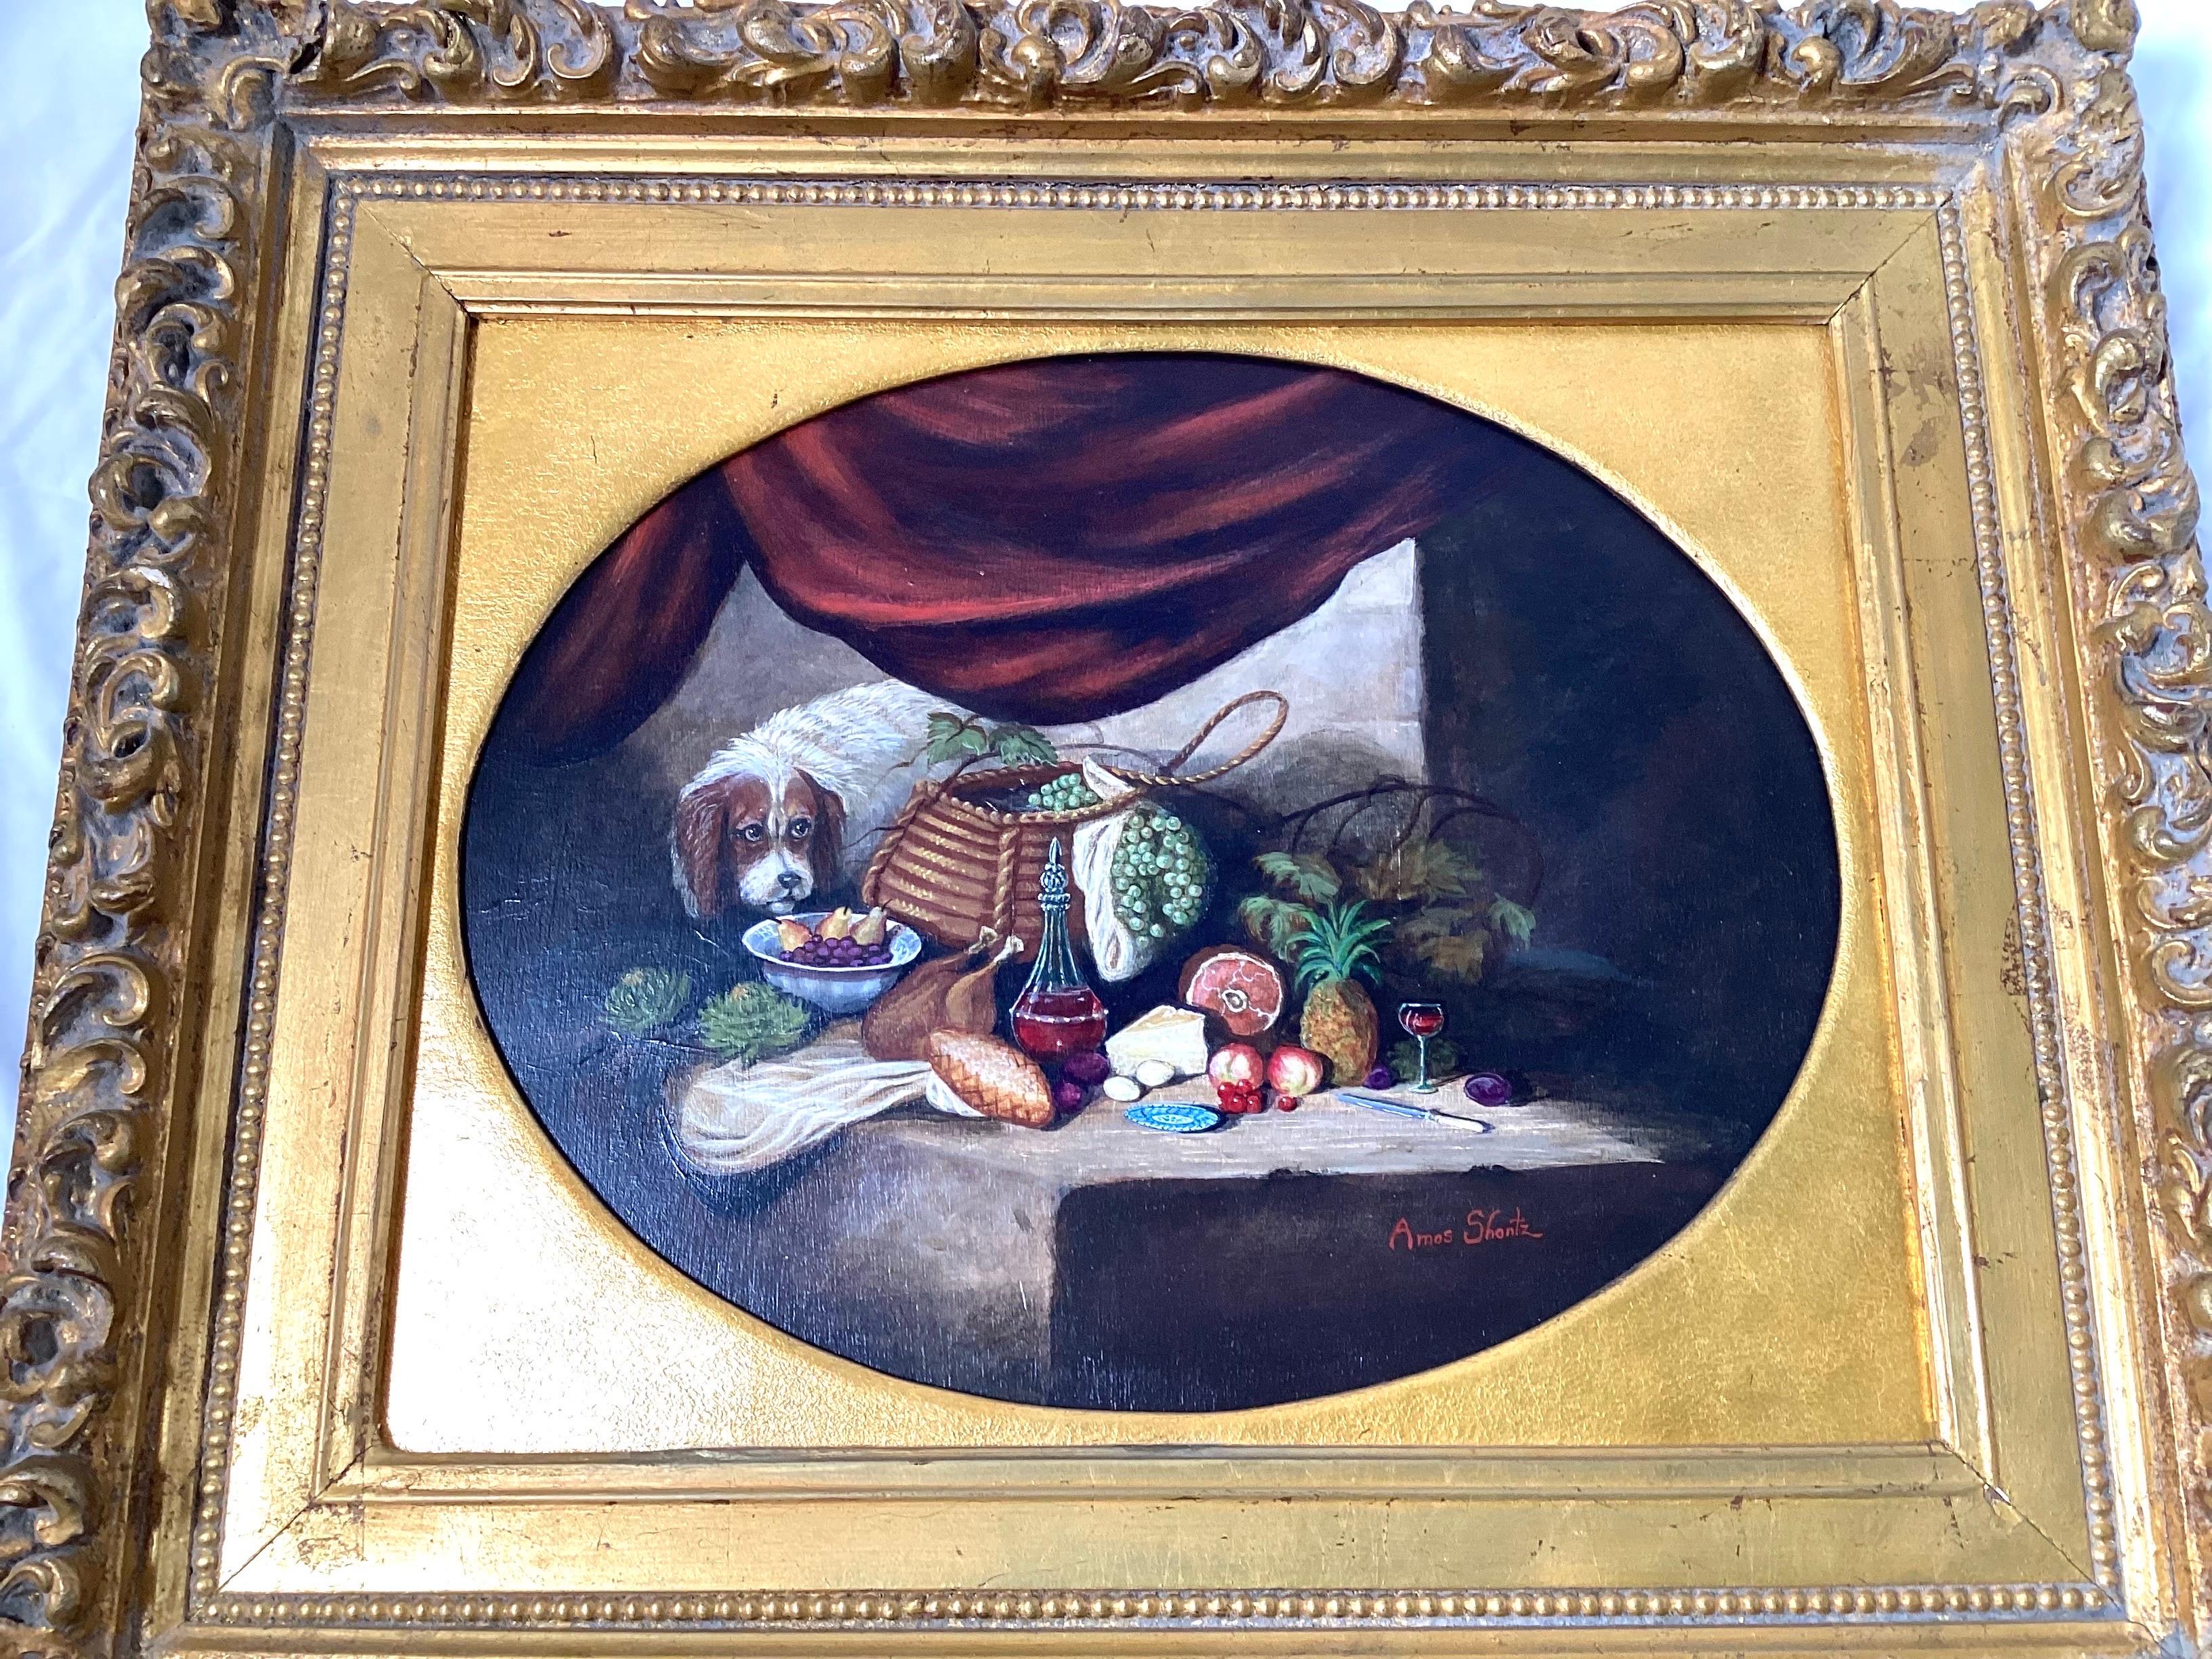 A original oil painting of a still life with dog, in original gilt wood frame. the framed painting is 29 wide, 25.5 high with the sight measuring 19.5 wide, 15.25 high in the oval gilt liner
Amos Shontz is a highly collected folk artist from